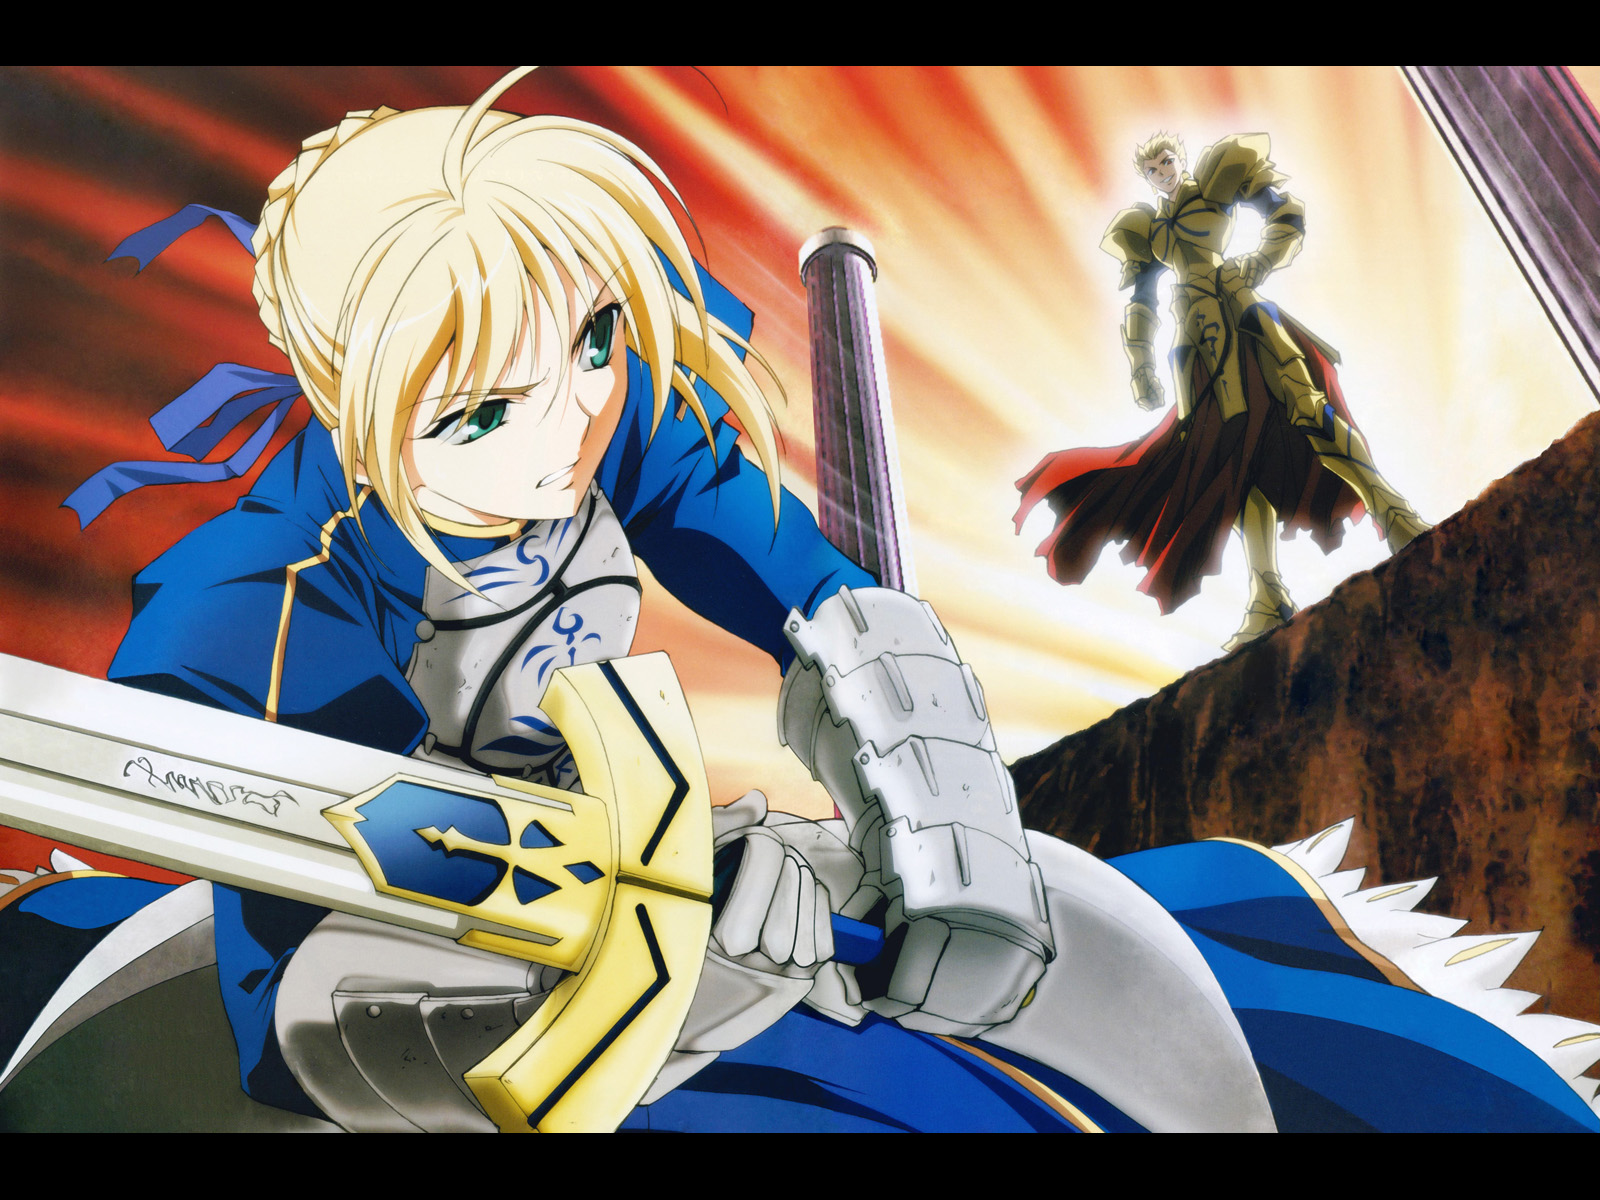 Anime characters from Fate/Zero: Saber, Gilgamesh, Archer in a dramatic scene.